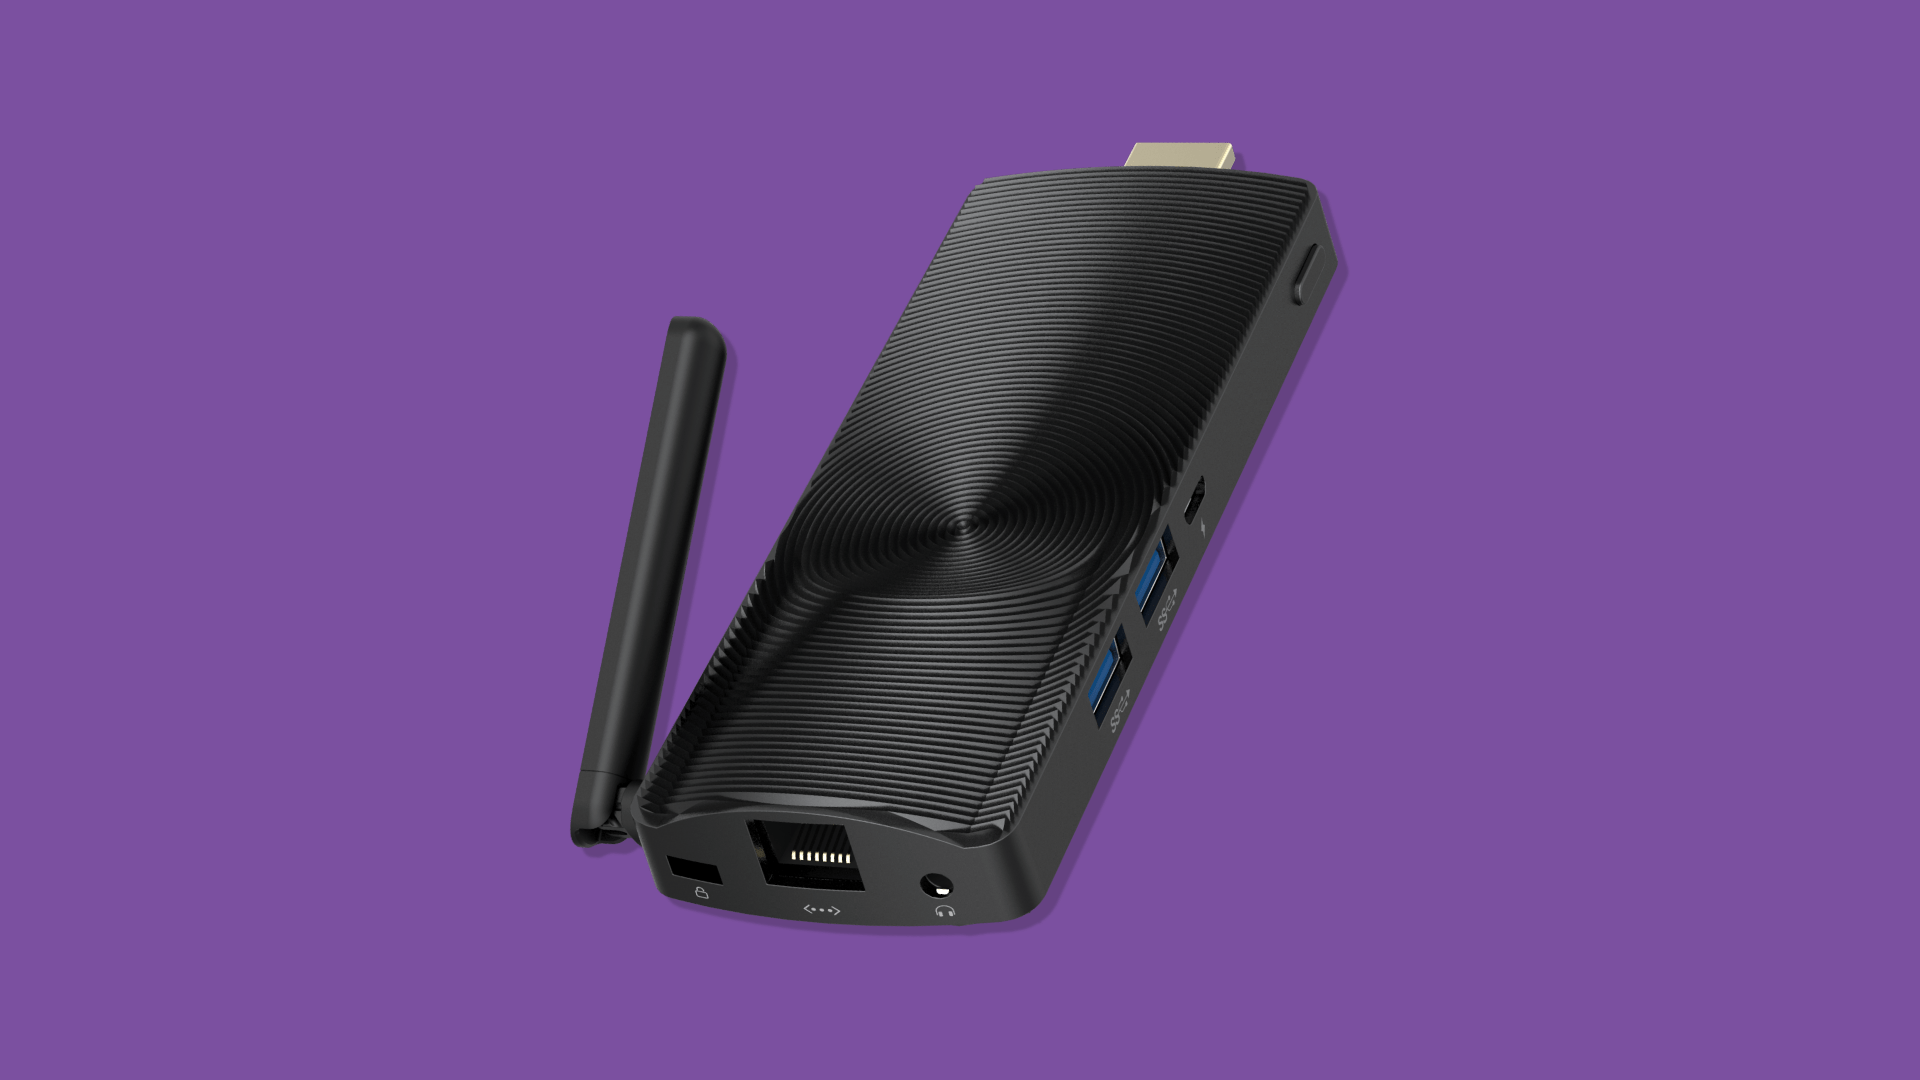 Mini PCs from Azulle – Access3 Review